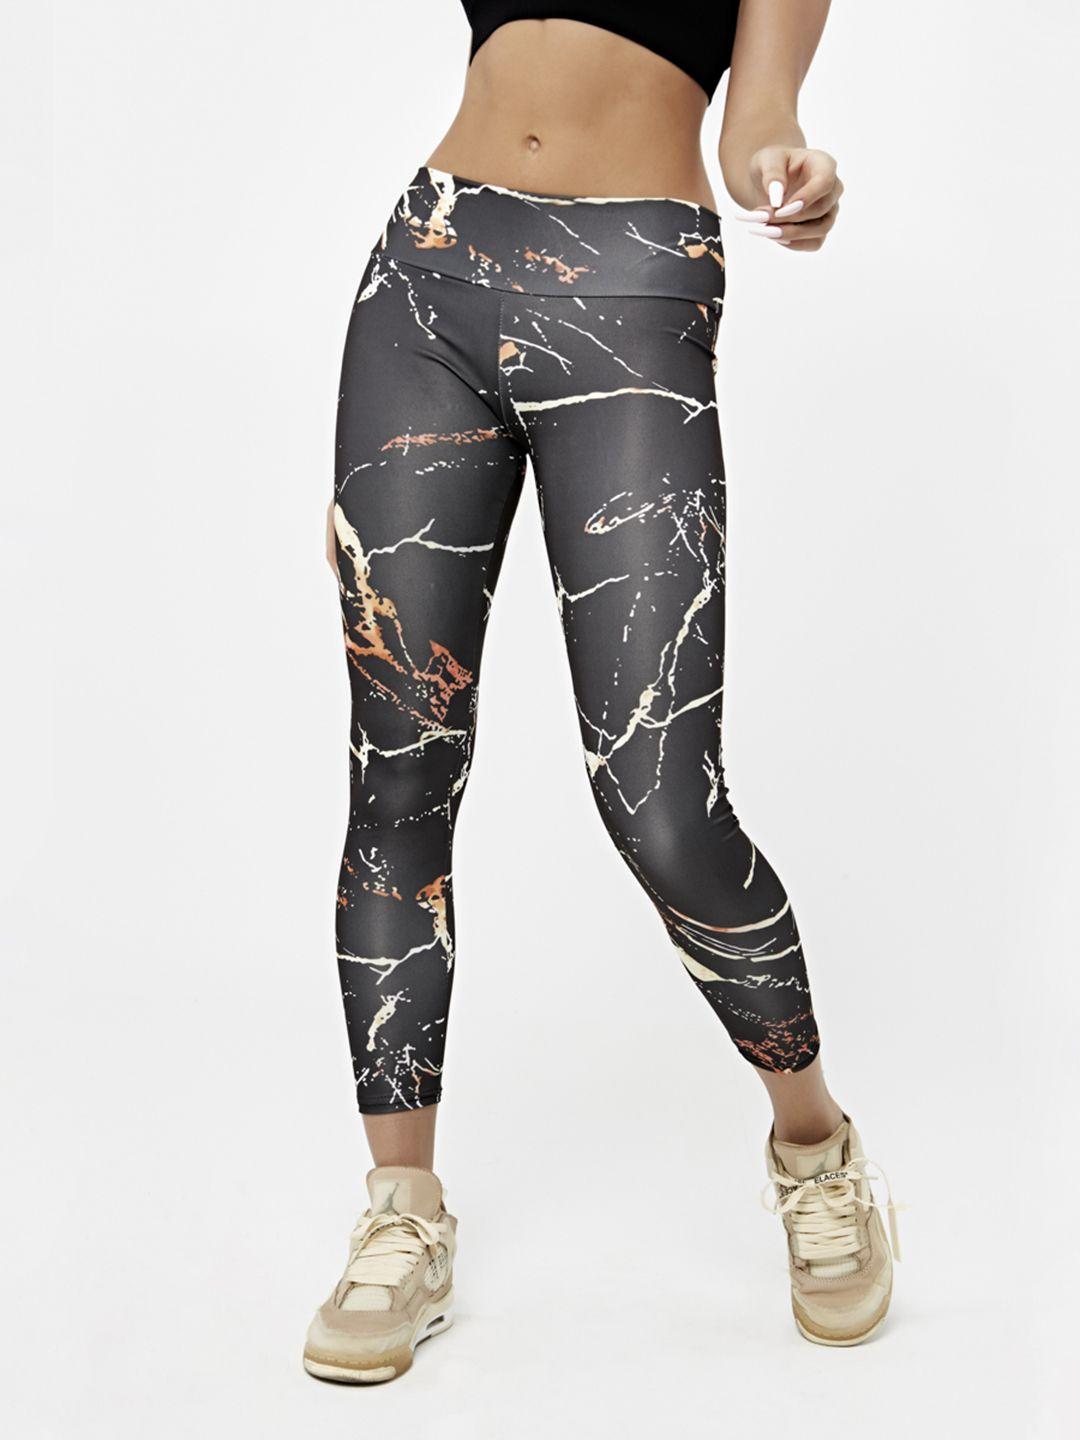 urbanic women black printed gym tights with lace-up detail